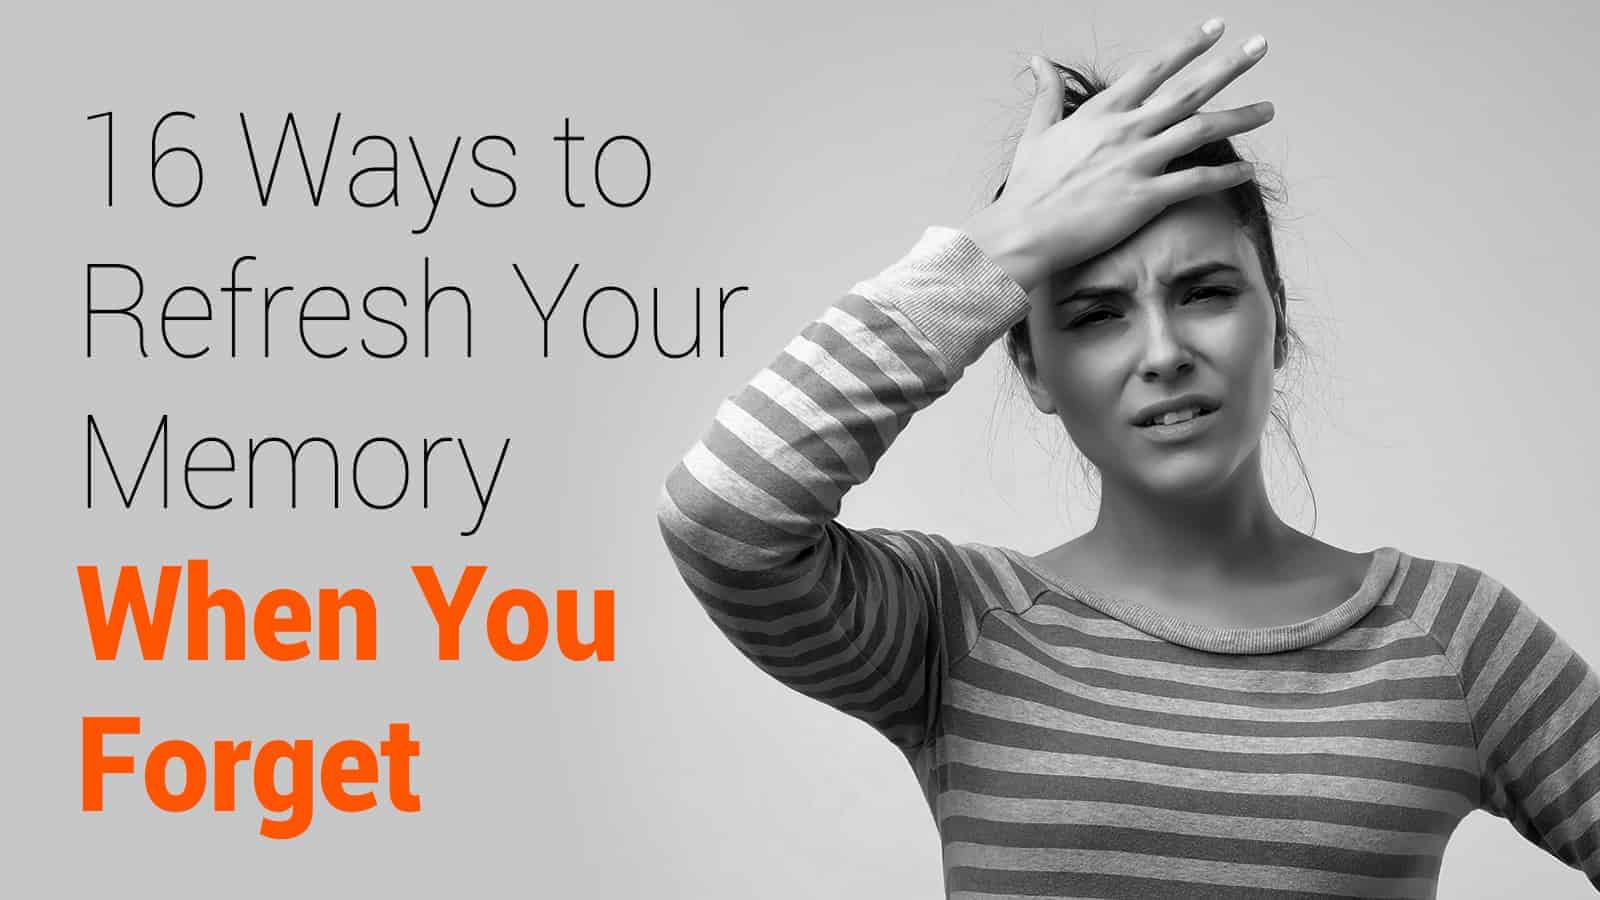 16 Ways to Refresh Your Memory When You Forget